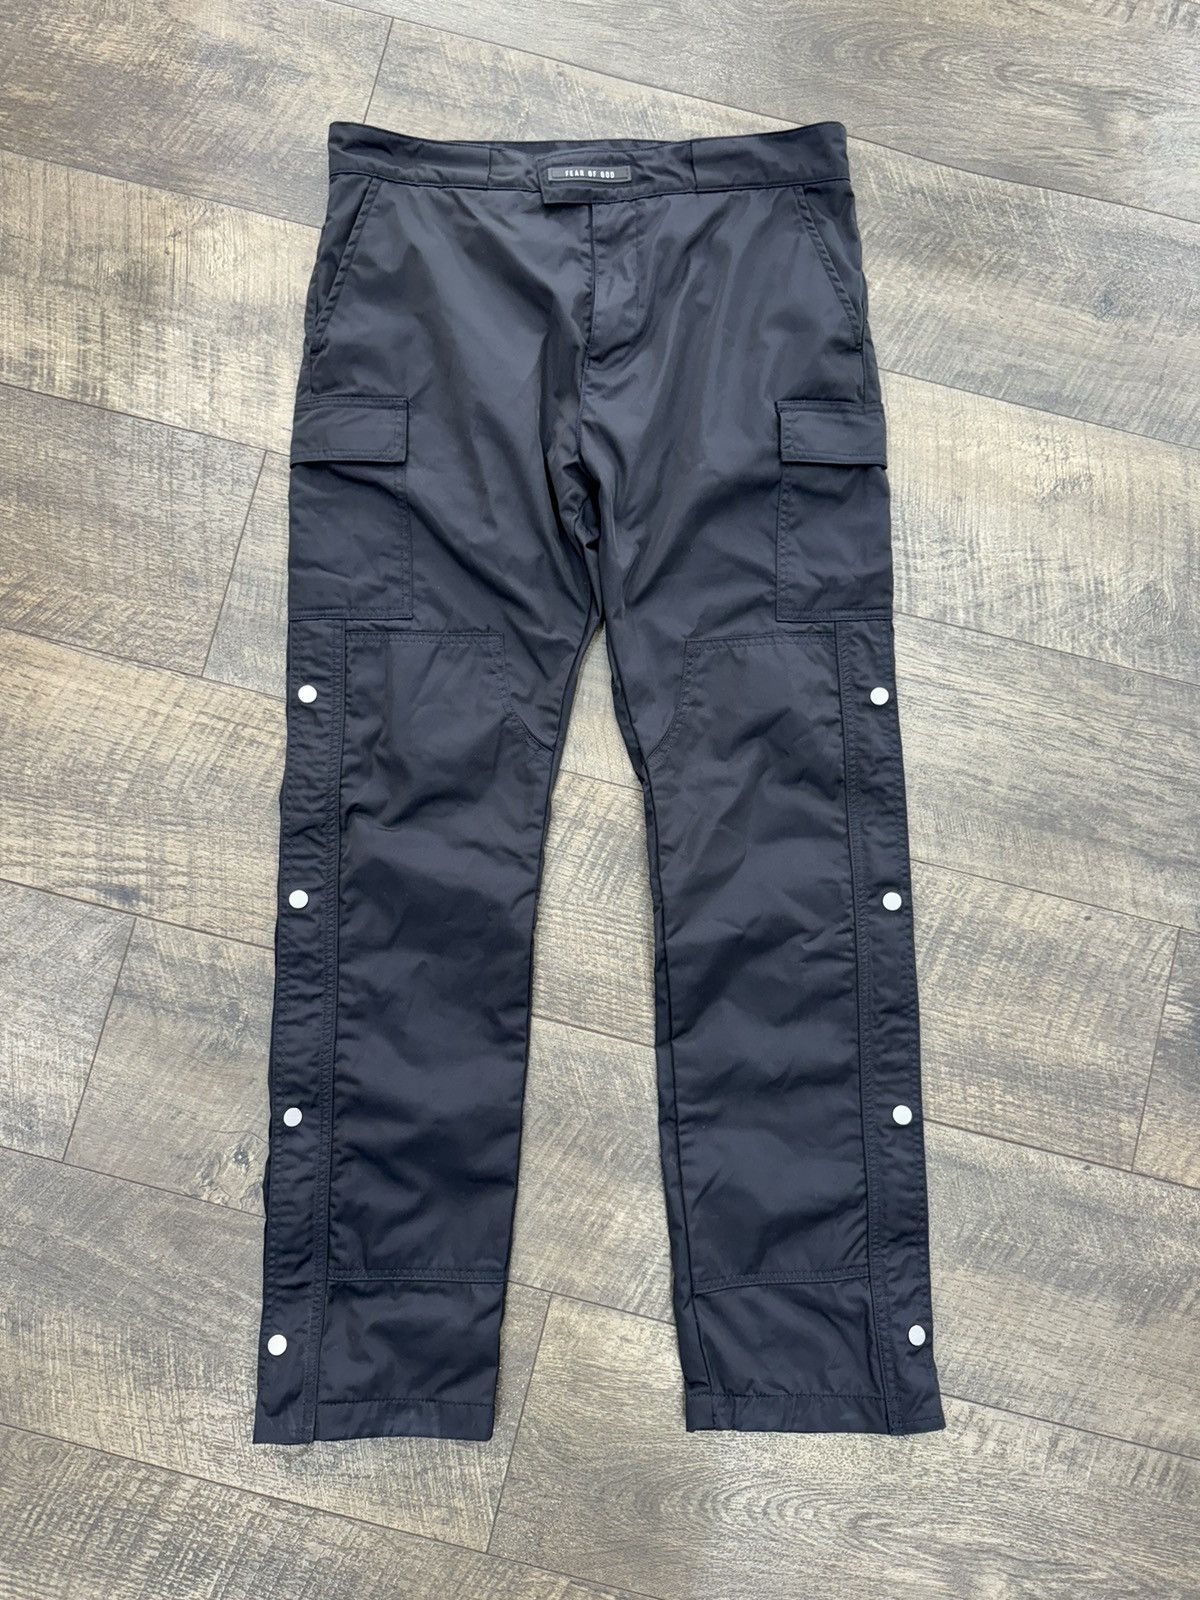 Fear of God Sixth Collection Nylon Cargo Pants Black (M) | Grailed